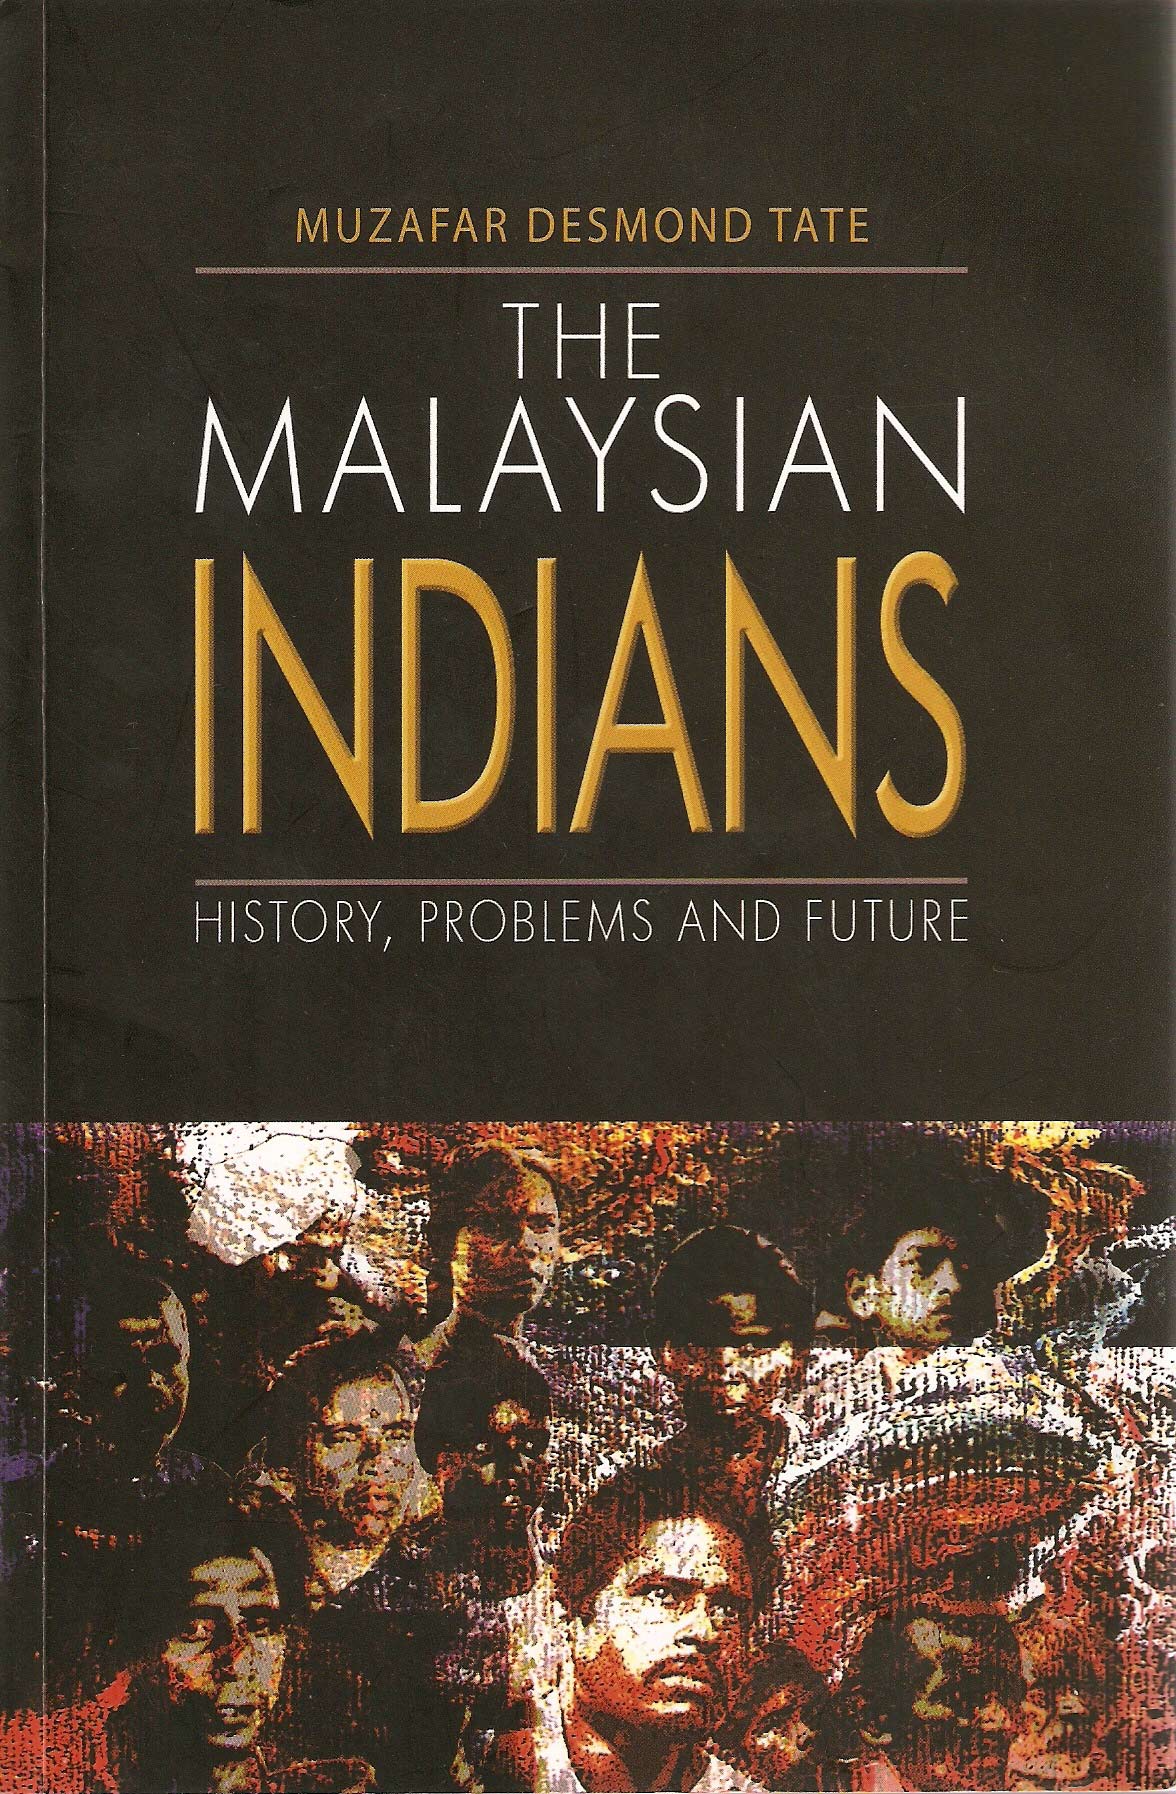 The Cover of the Book <i>The Malaysian Indians